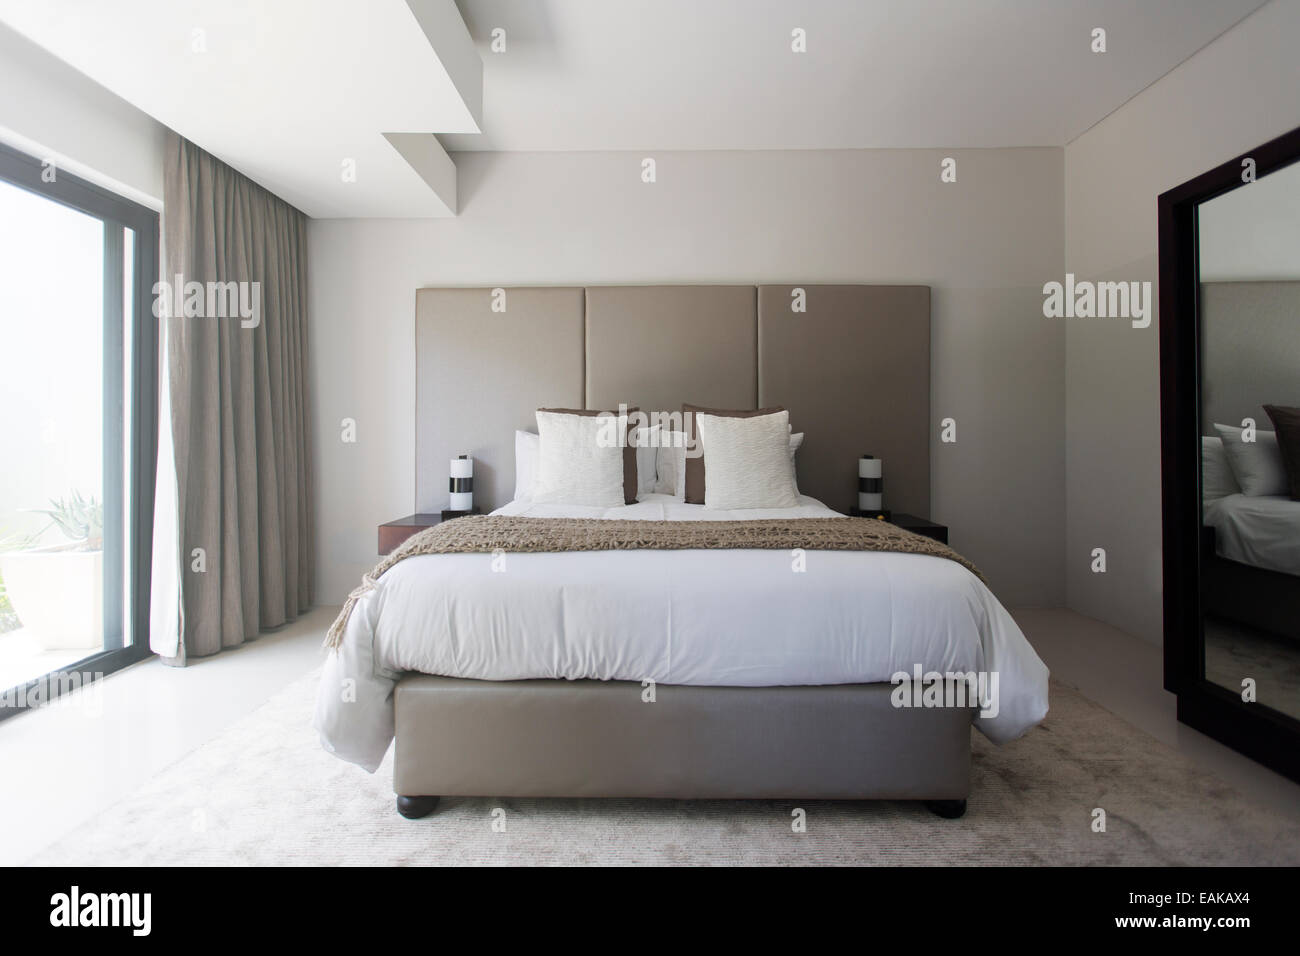 Modern white and beige bedroom with double bed Stock Photo